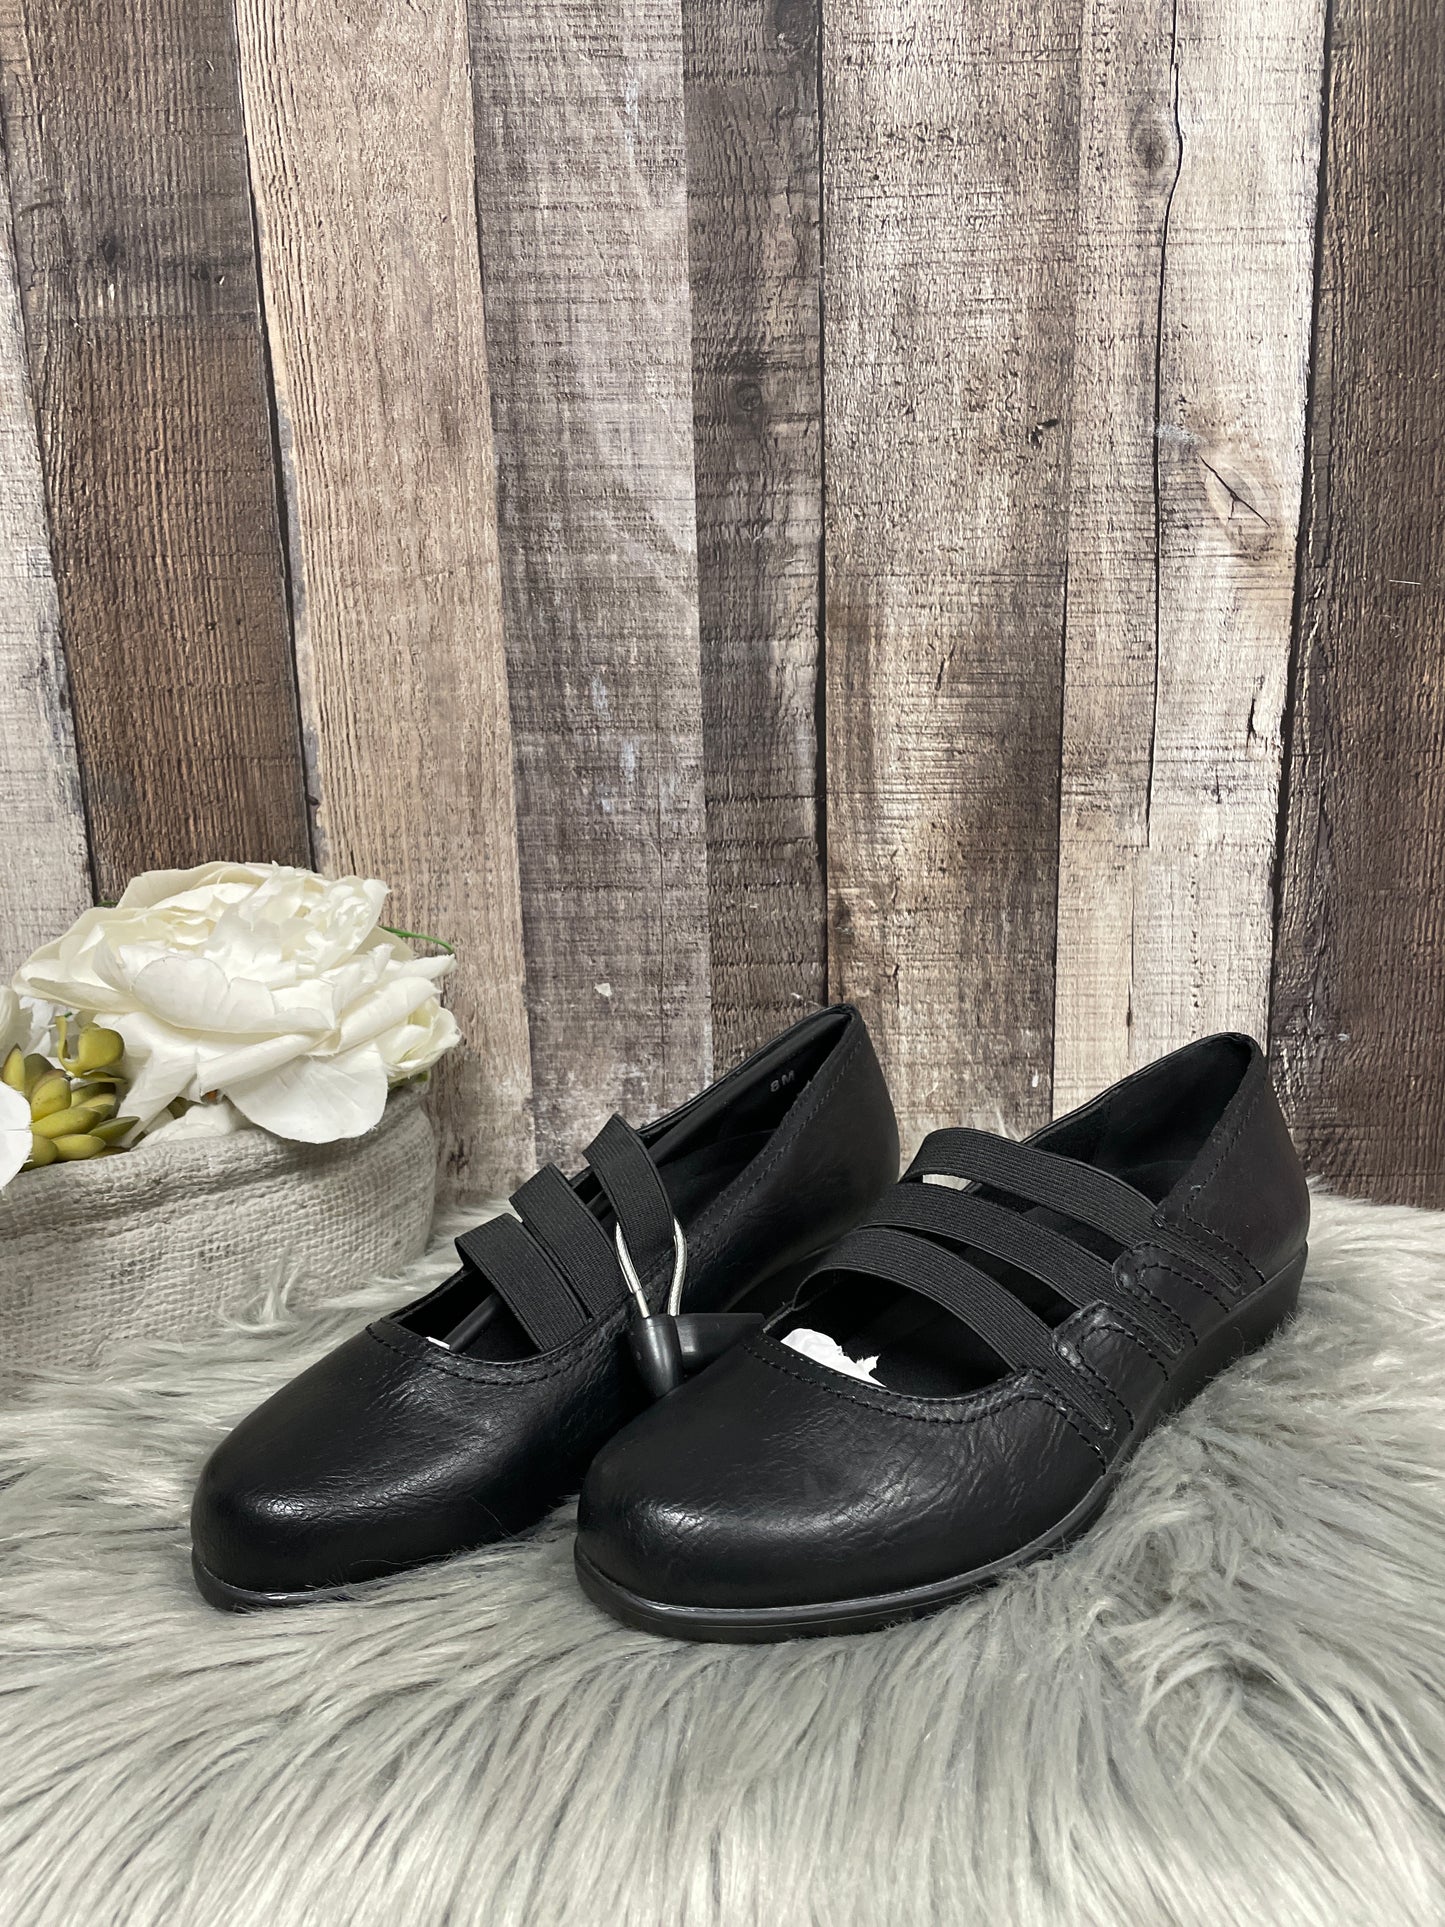 Shoes Flats By Easy Spirit  Size: 8